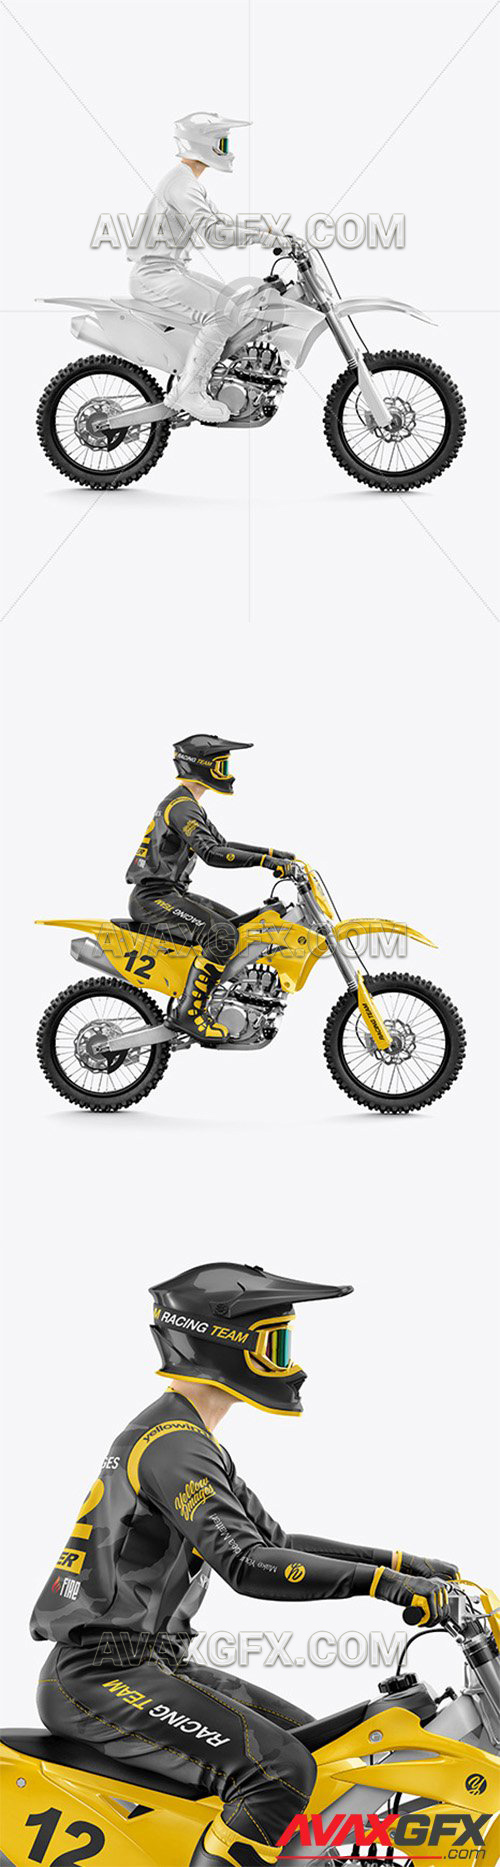 Download Motocross Racing Kit Mockup 58035 » AVAXGFX - All Downloads that You Need in One Place! Graphic ...